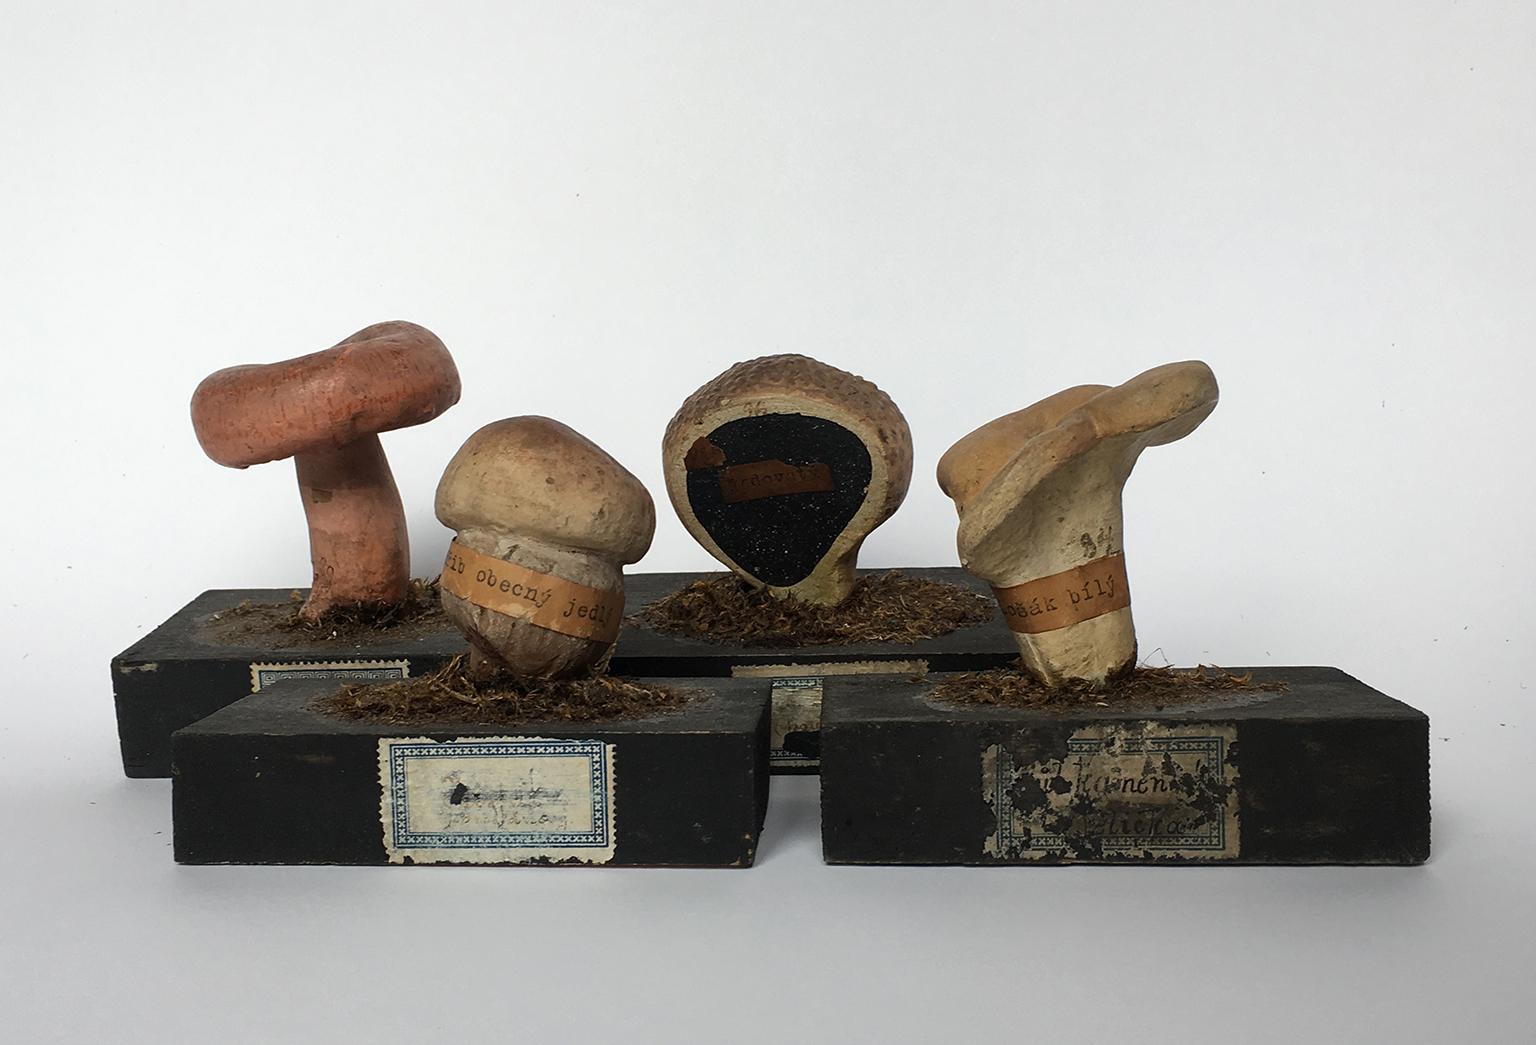 Collection of 34 mycological models
Czechoslovakia, first twenty years of the 20th century.

The models are made using mixed techniques, mainly wood and painted plaster. Some specimens bear a paper label around the stem or on the base with the